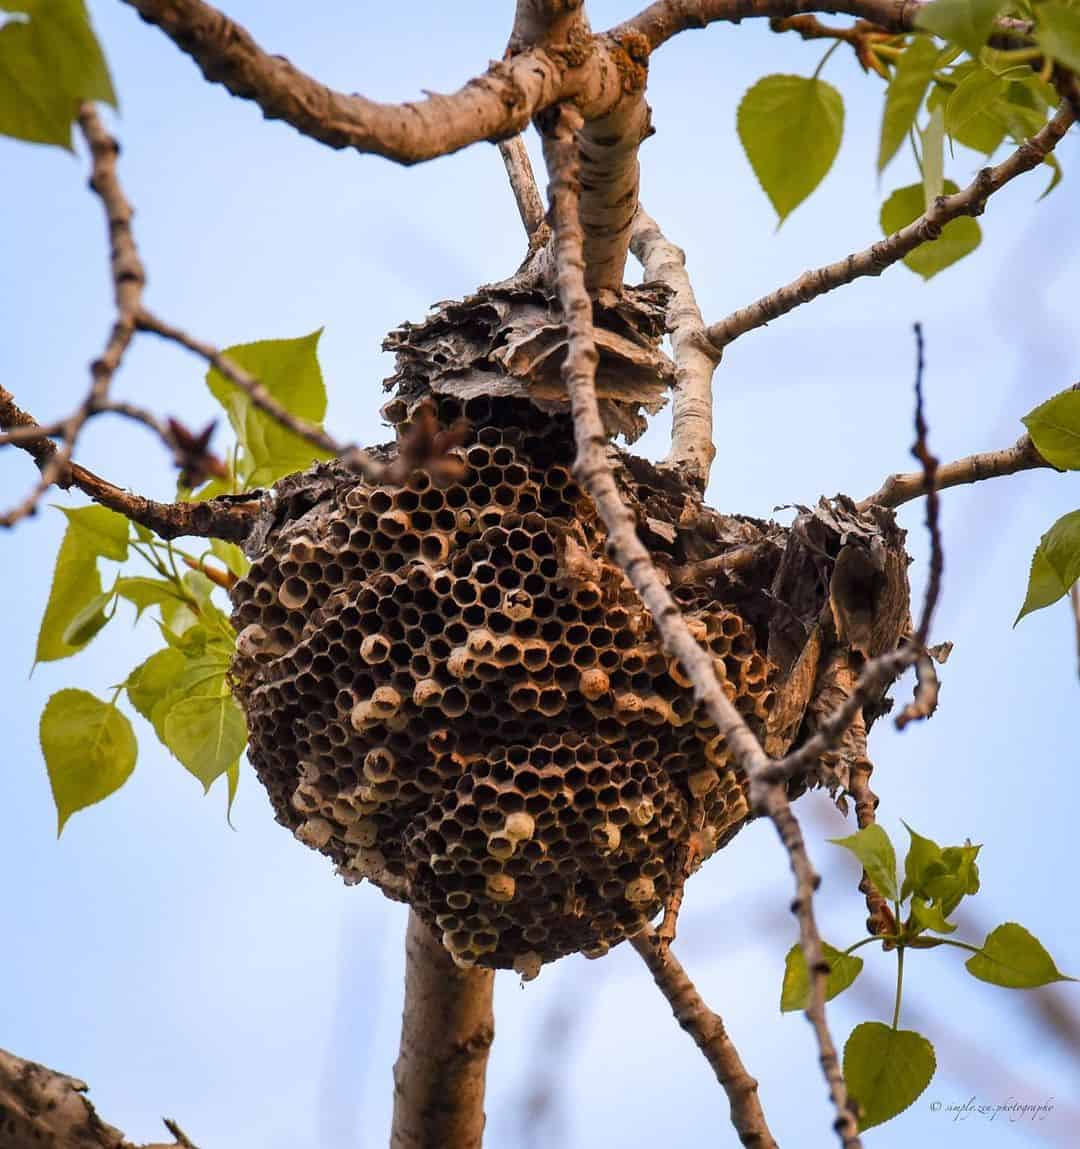 How to Handle a Hornet or Wasp Nest